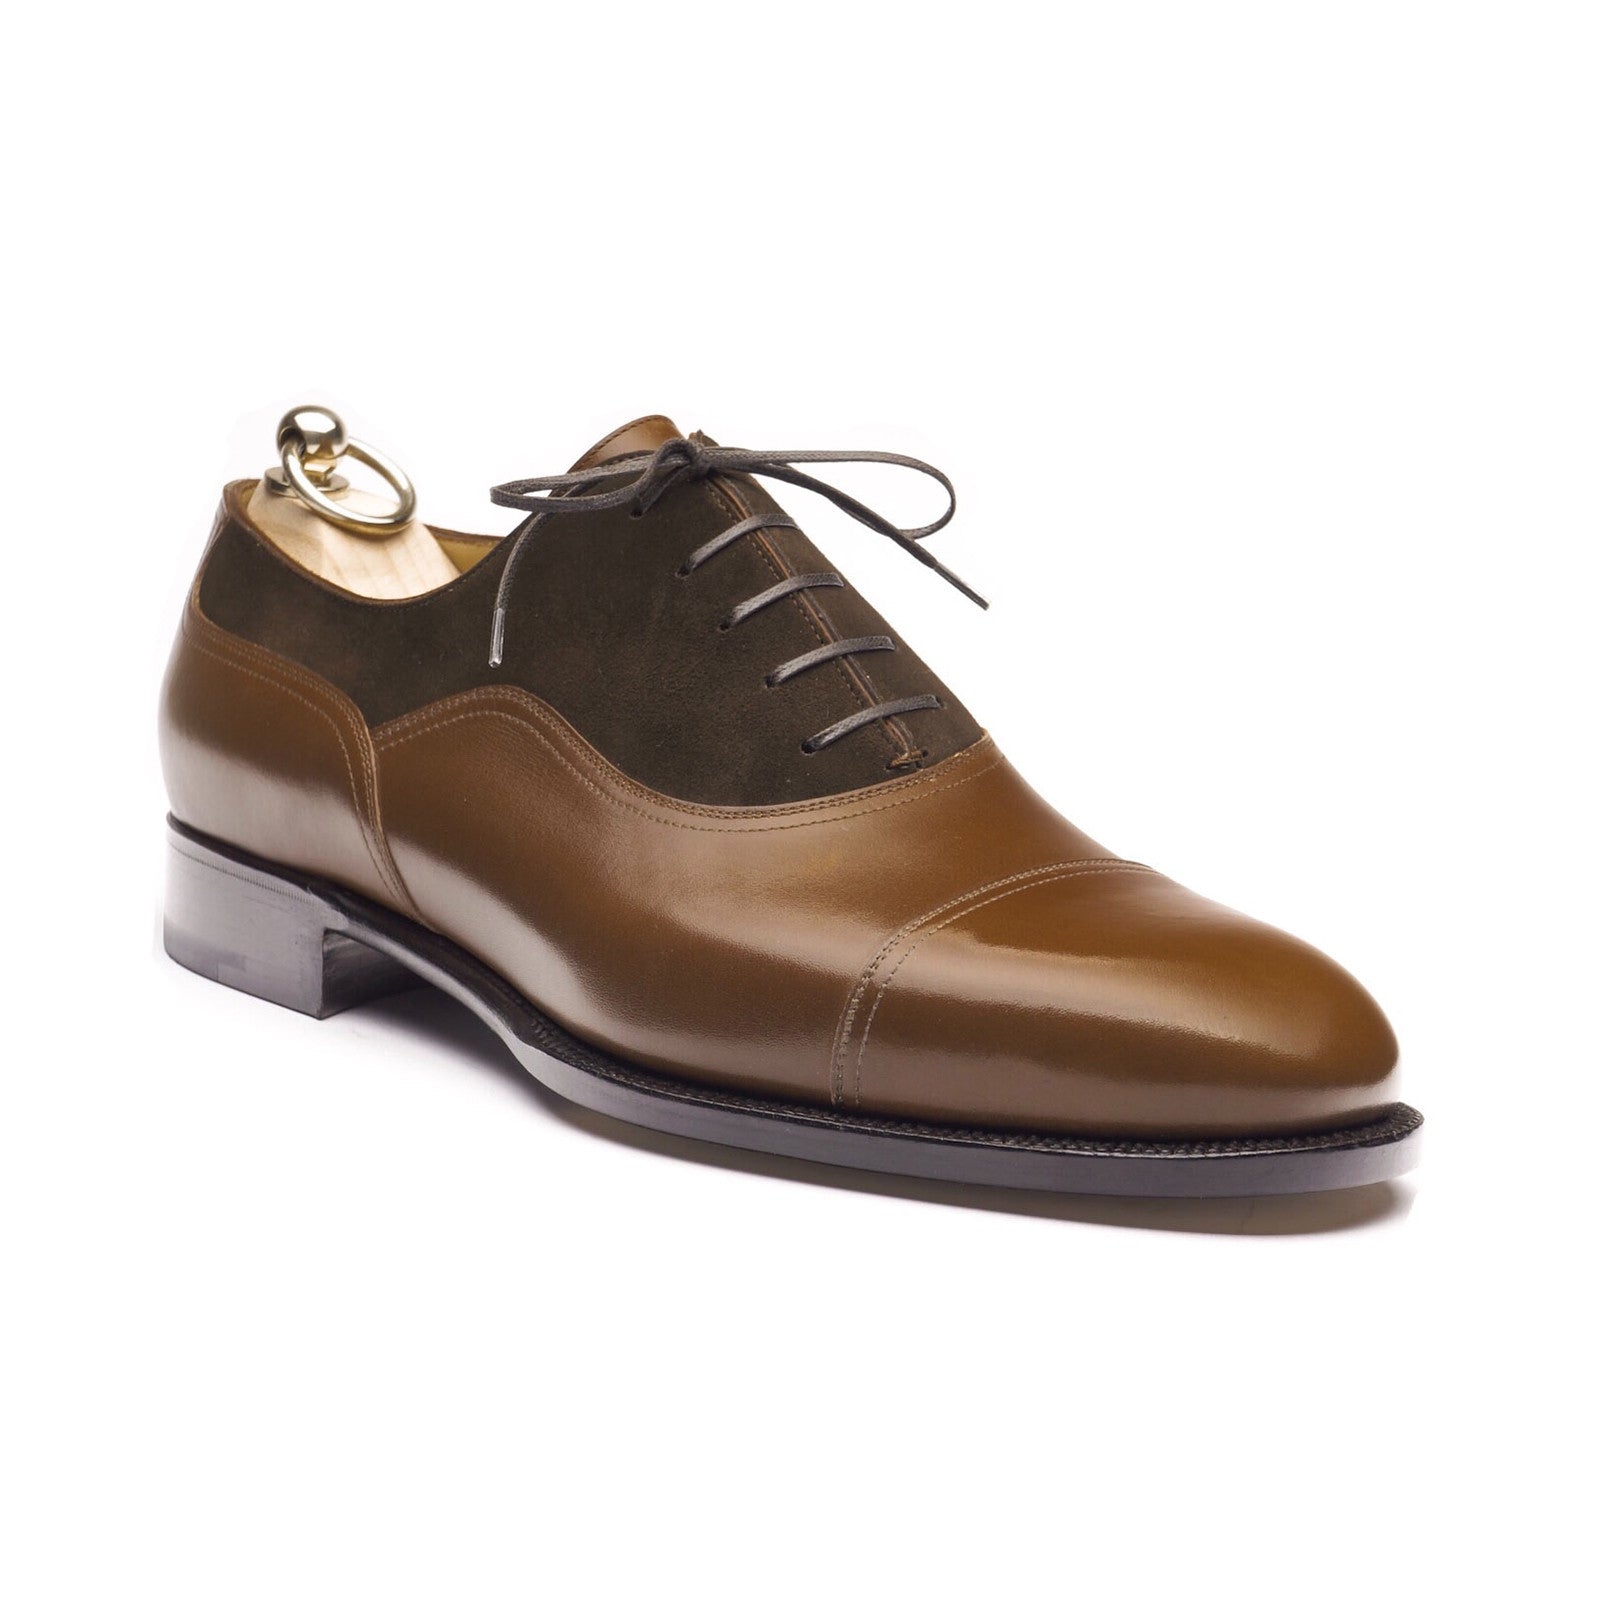 Stefano Bemer Style 6320 - Brown Calf / Brown Suede - Default Pic